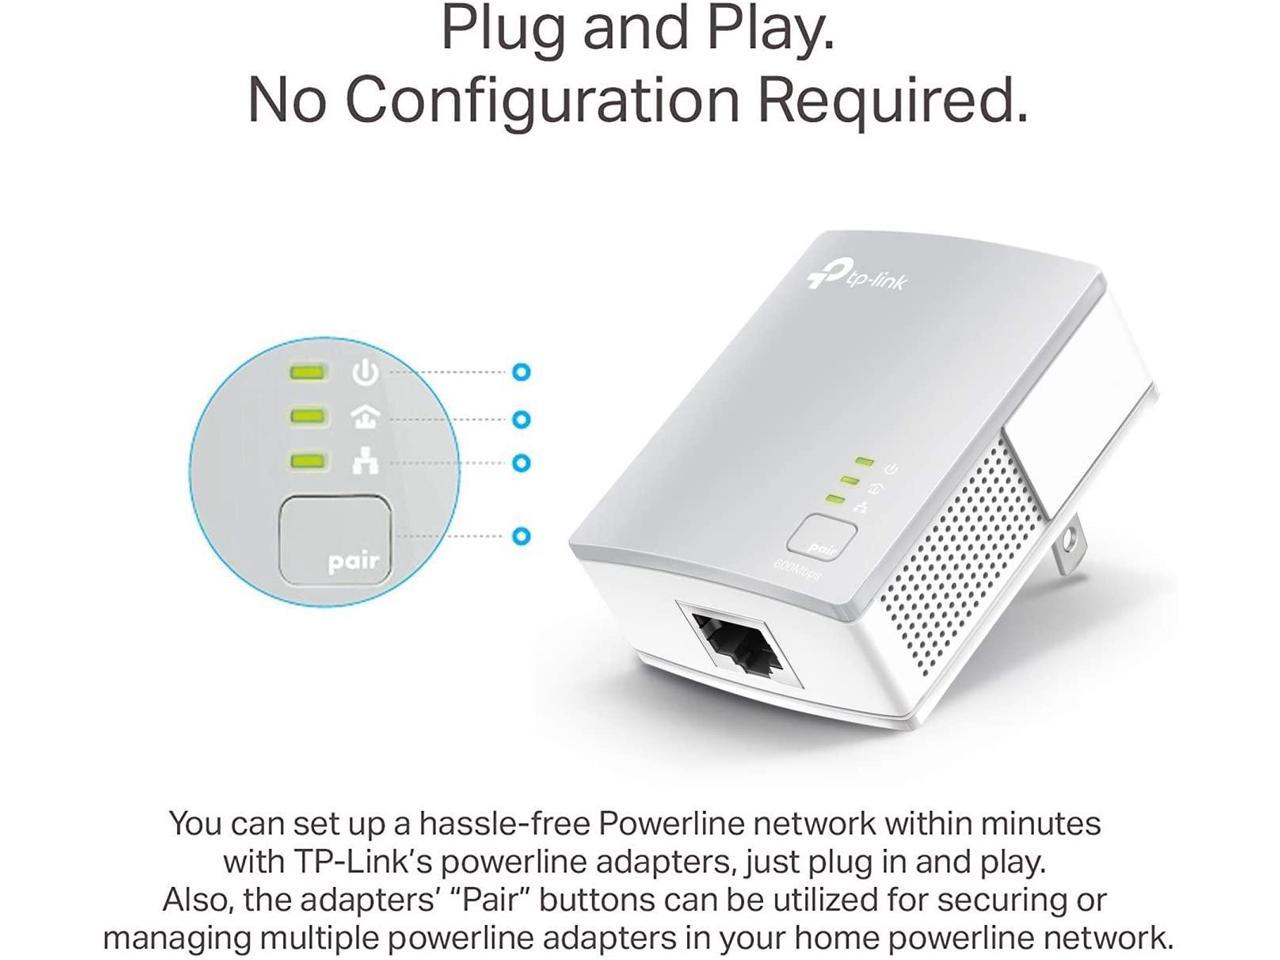 slepen Uitrusting Bedrijfsomschrijving TP-Link AV600 Powerline Ethernet Adapter(TL-PA4010 KIT)- Plug&Play, Power  Saving, Nano Powerline Adapter, Expand Home Network with Stable Connections  - Newegg.com